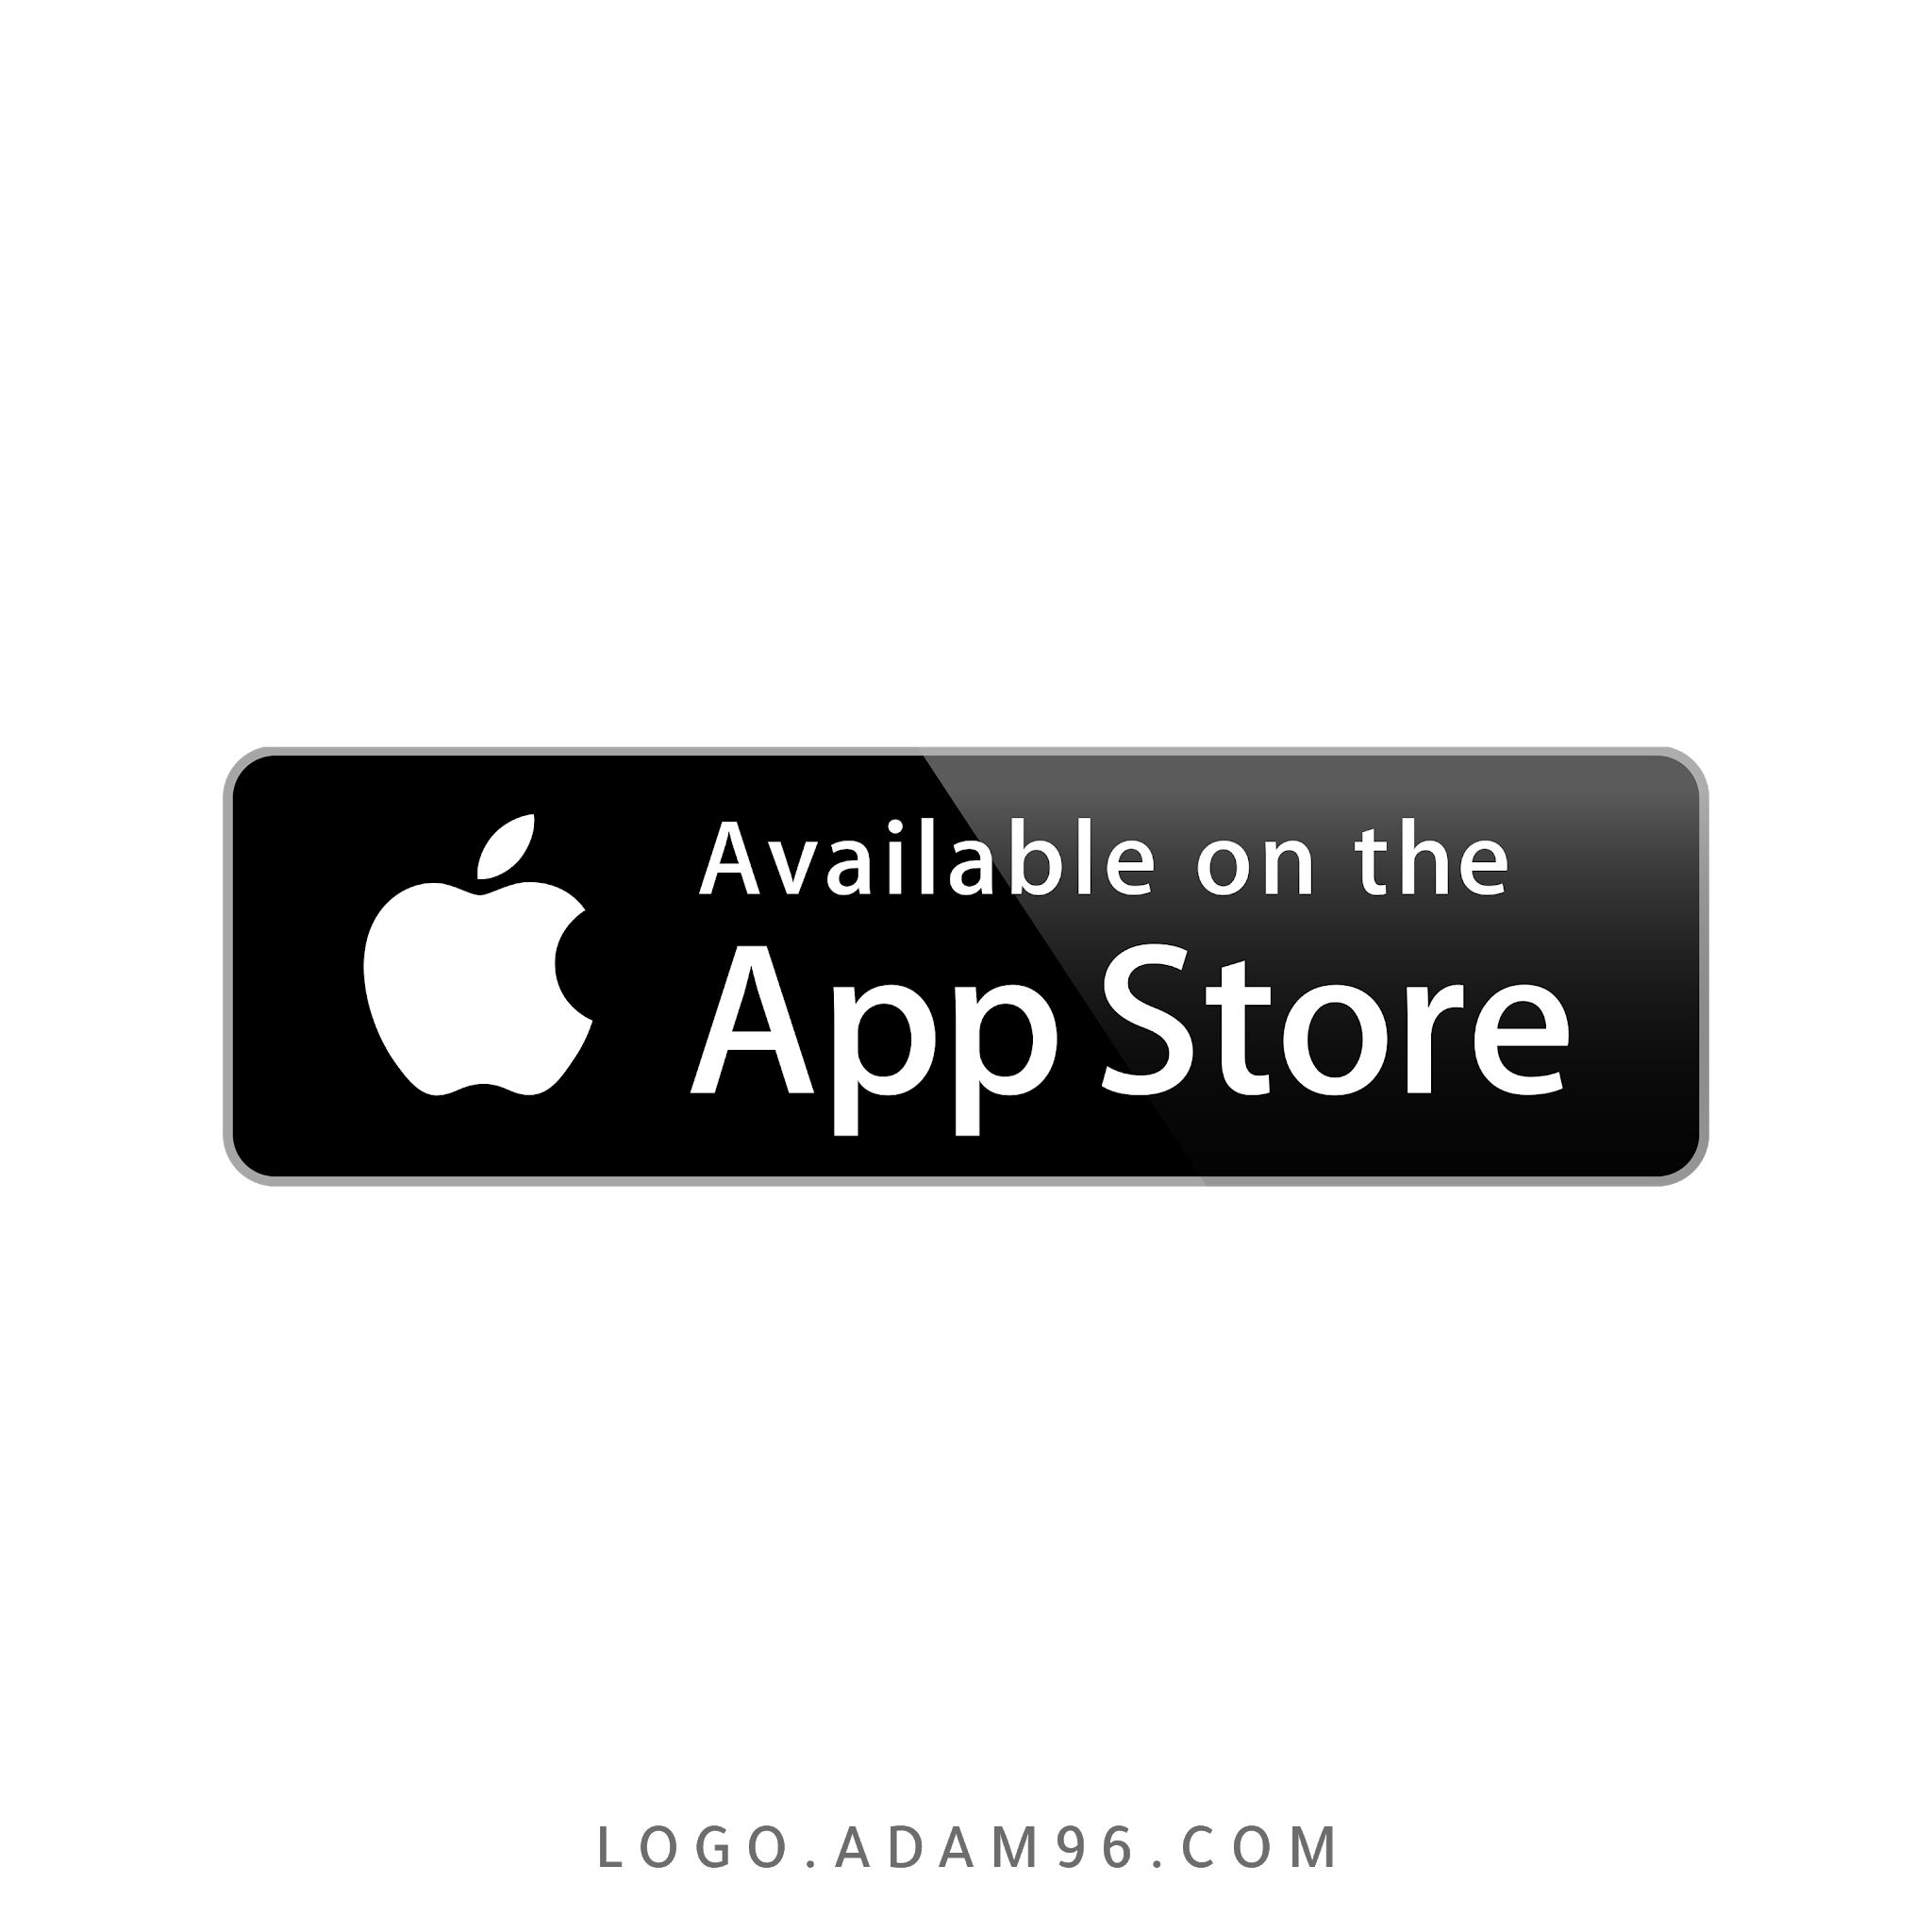 Download Aivalable on the App Store Logo Vector PNG Original Logo Big Size